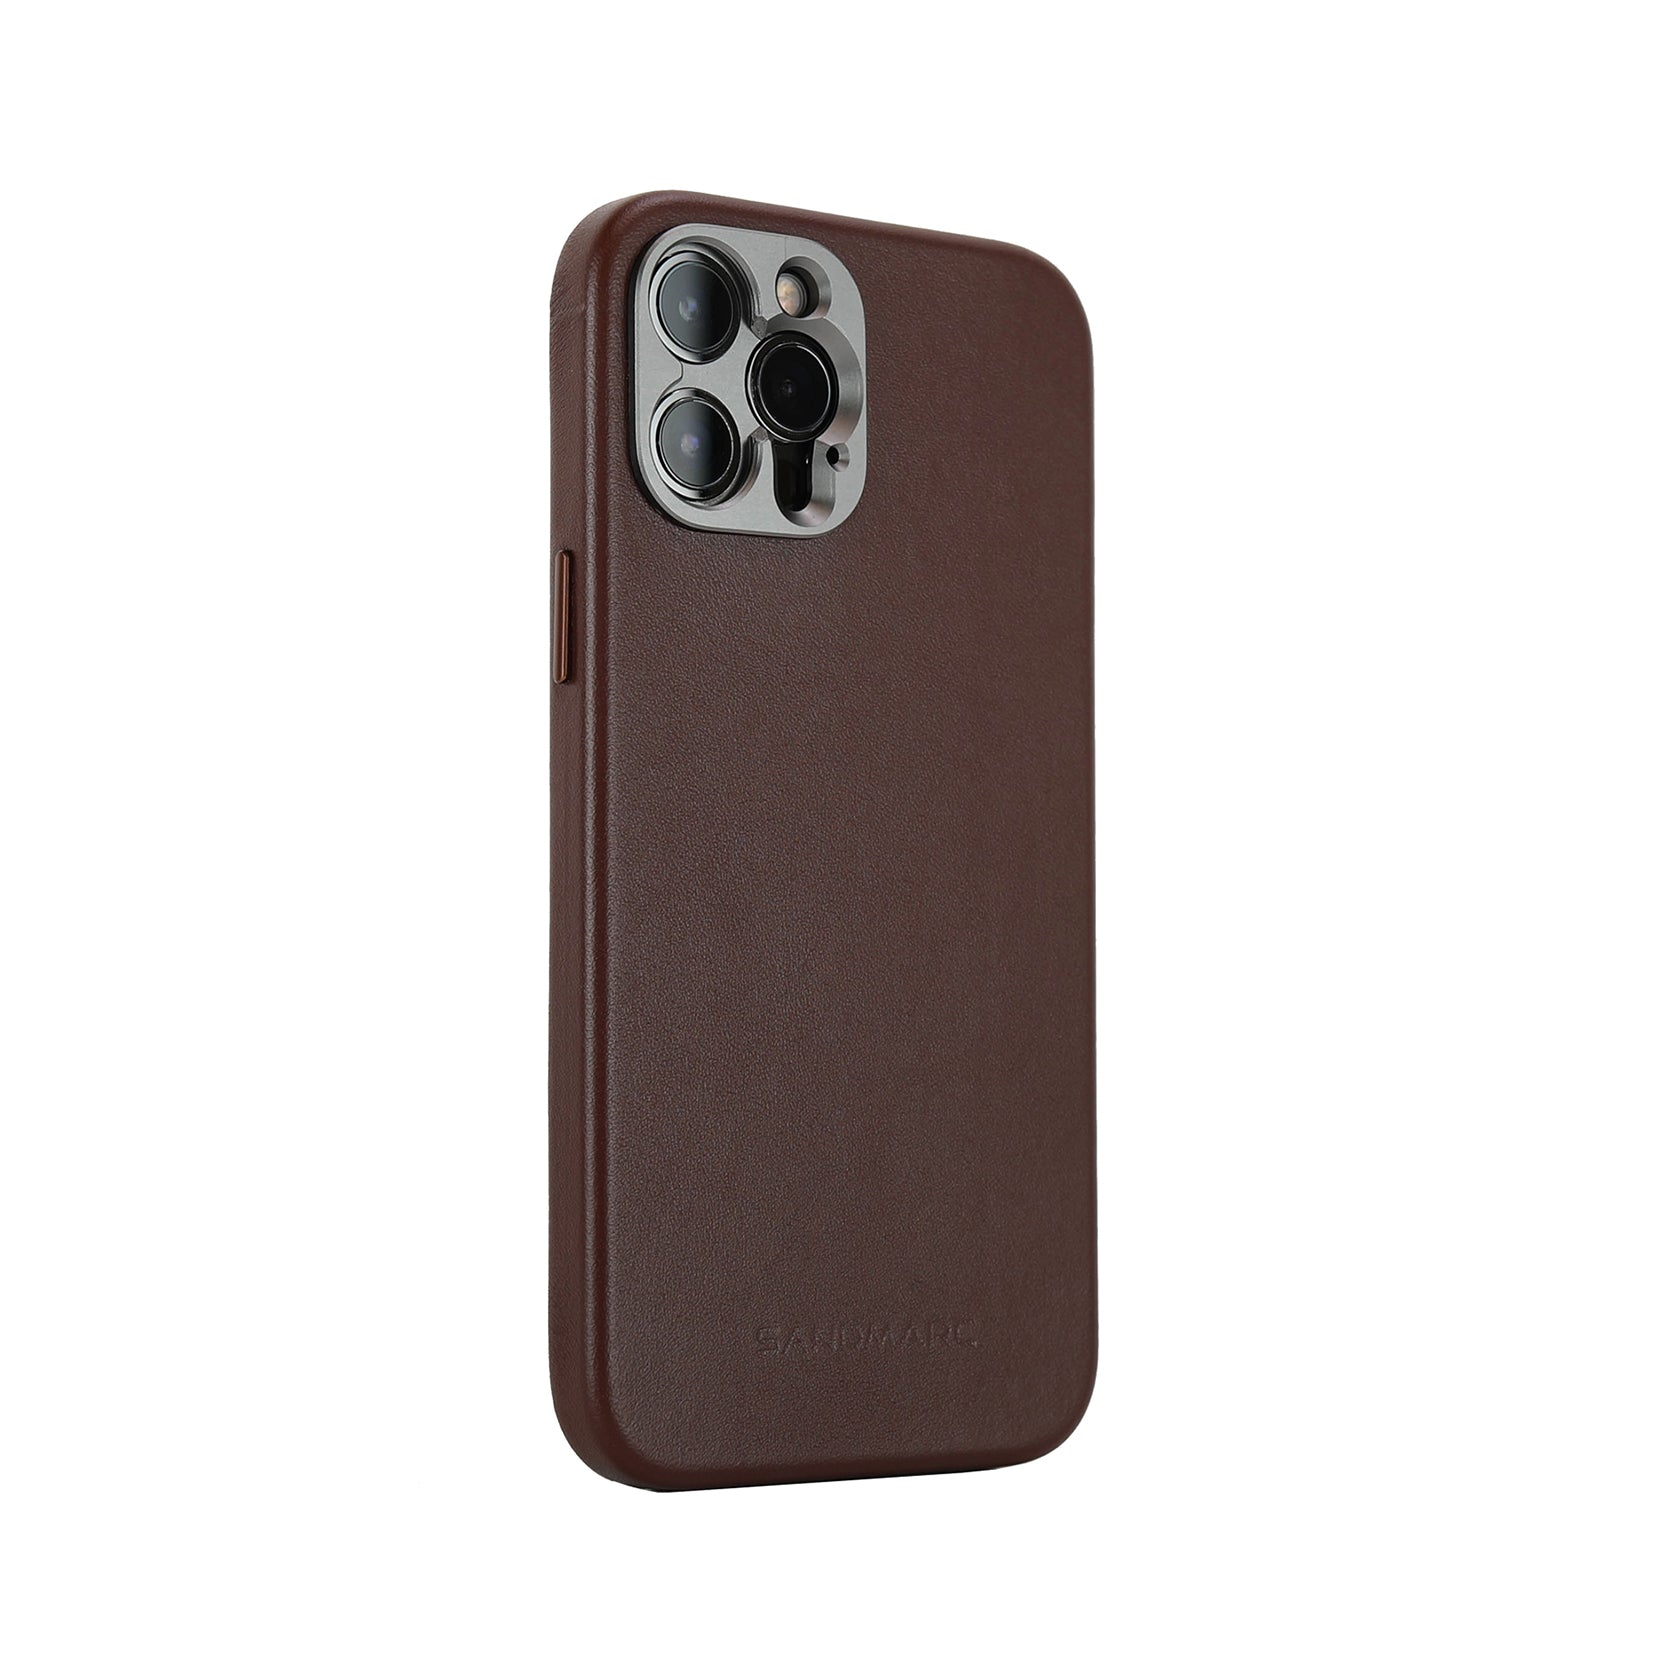 Louis Bag Leather Case Cell Mobile Phone Back Cover for iPhone 11